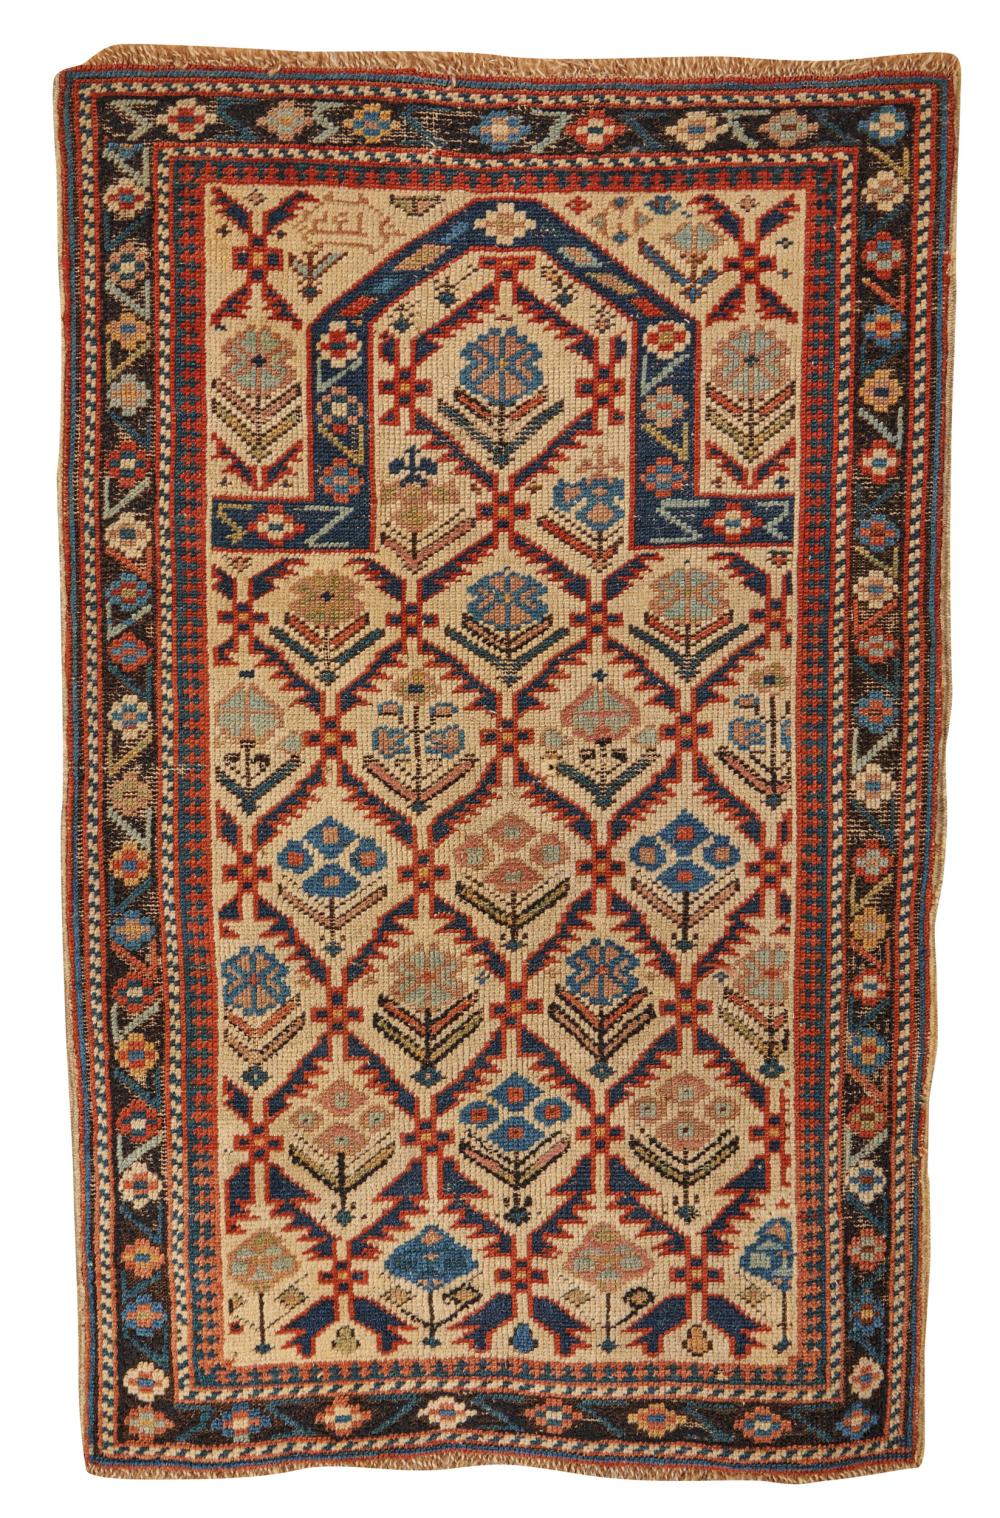 UNUSUAL SMALL FORMAT SHIRVAN PAYER